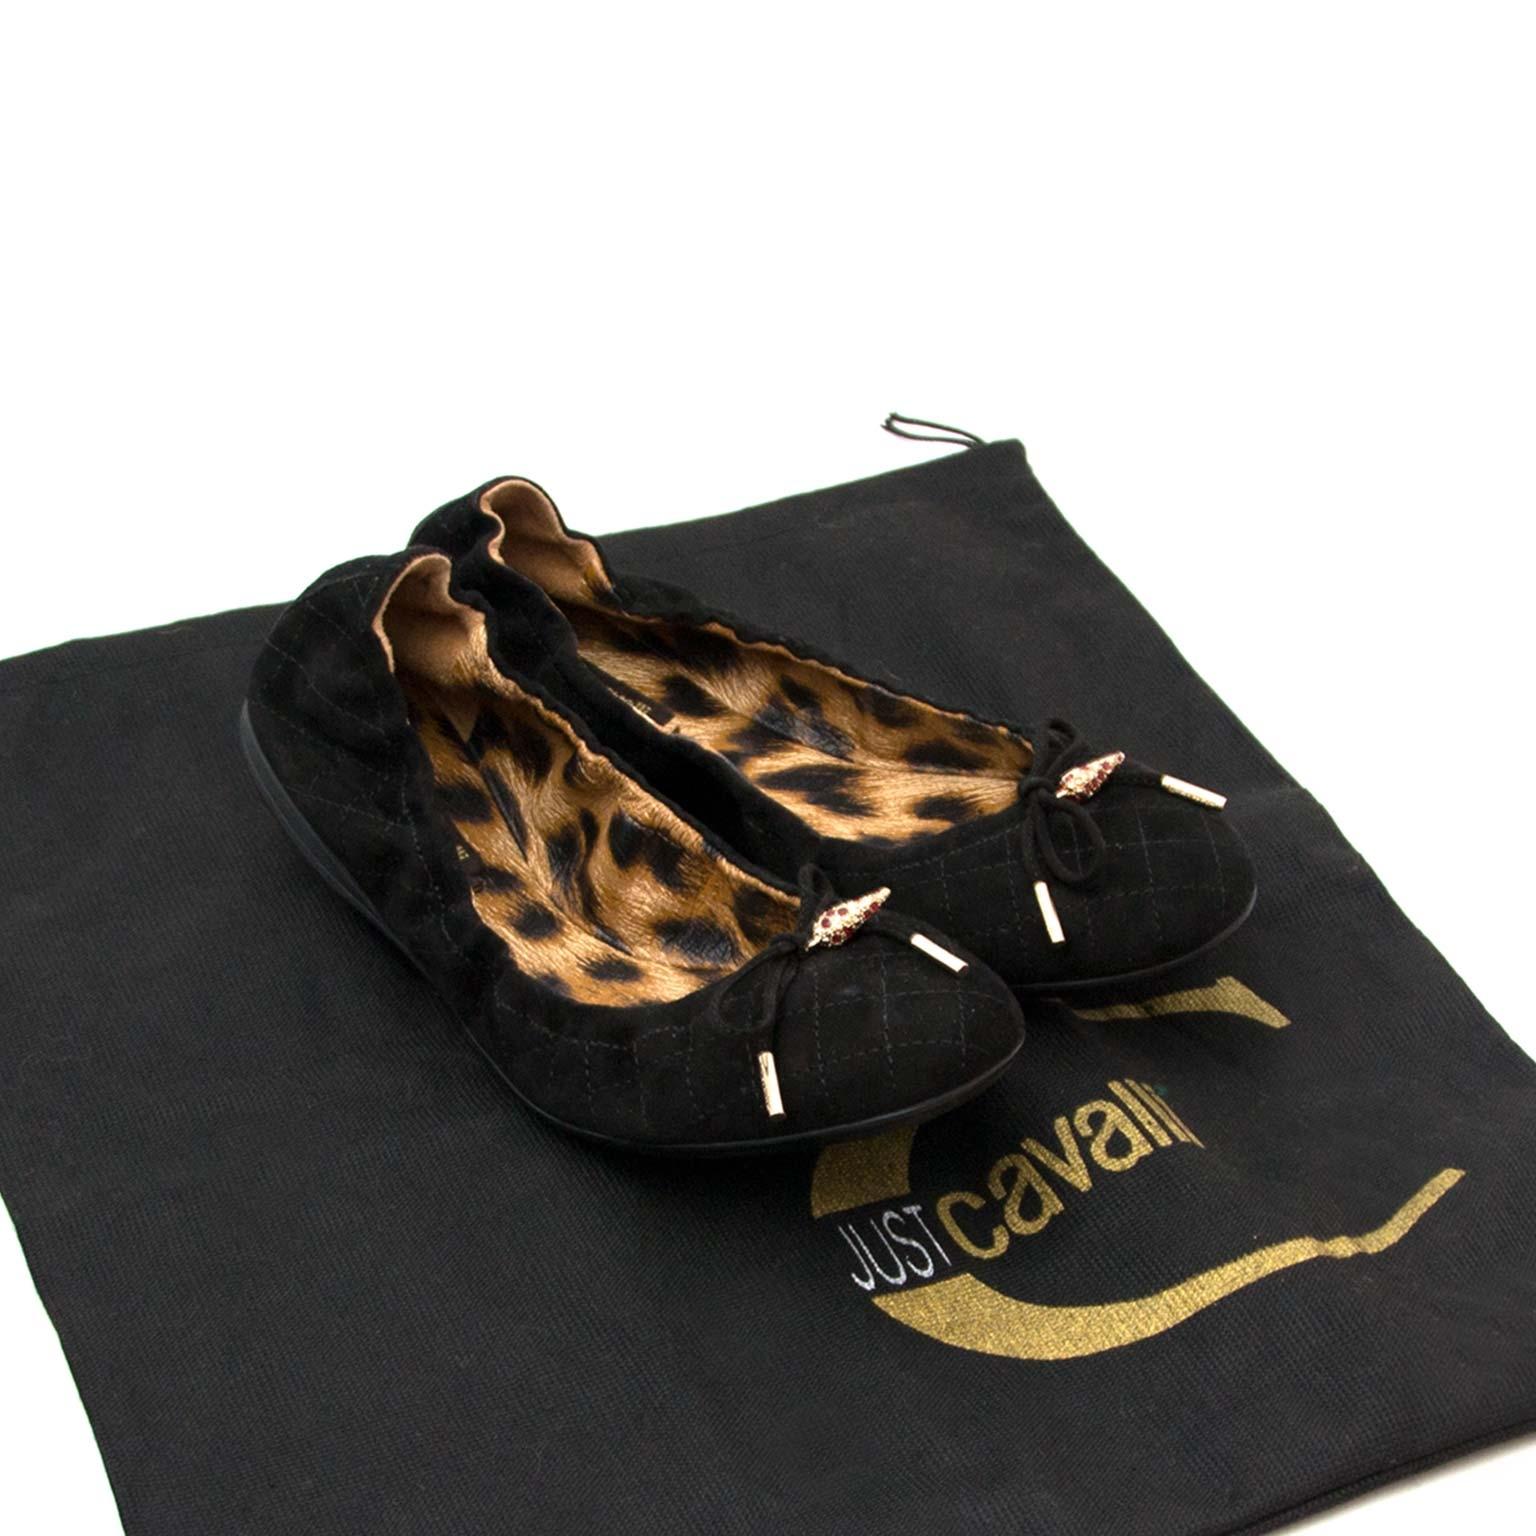 Very Good Preloved Condition

Estimated Retail price: € 455,00

Roberto Cavalli Black Ballet Flats - Size 38

Ballet flats are a classic and comfortabe way to leave the house. This pair by Roberto Cavalli is made of black suède with leopard printed